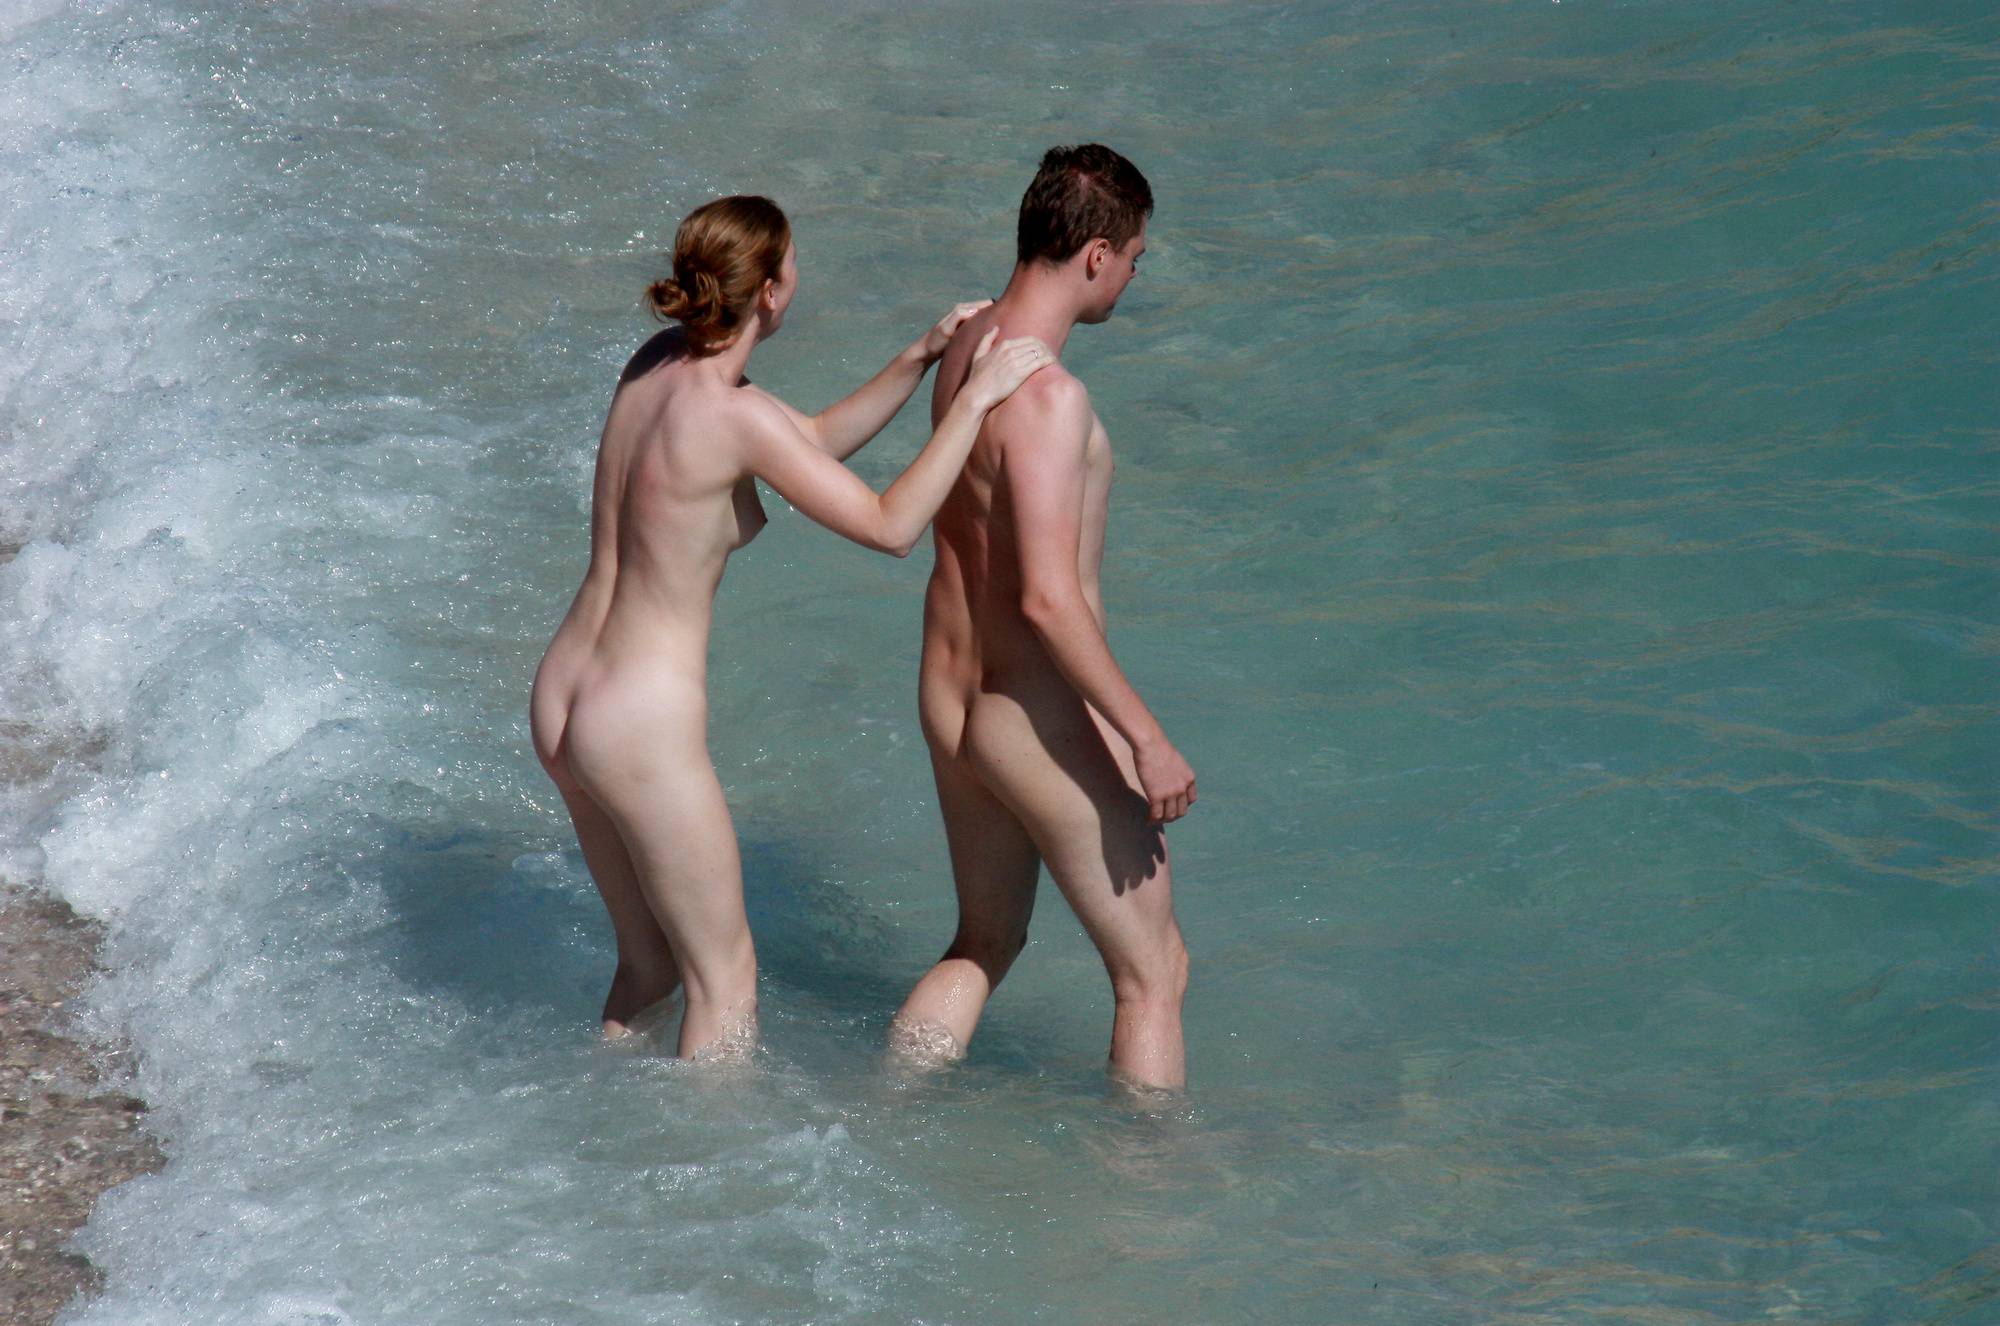 Family nudism at its finest: A young nudist couple enjoying the the sea